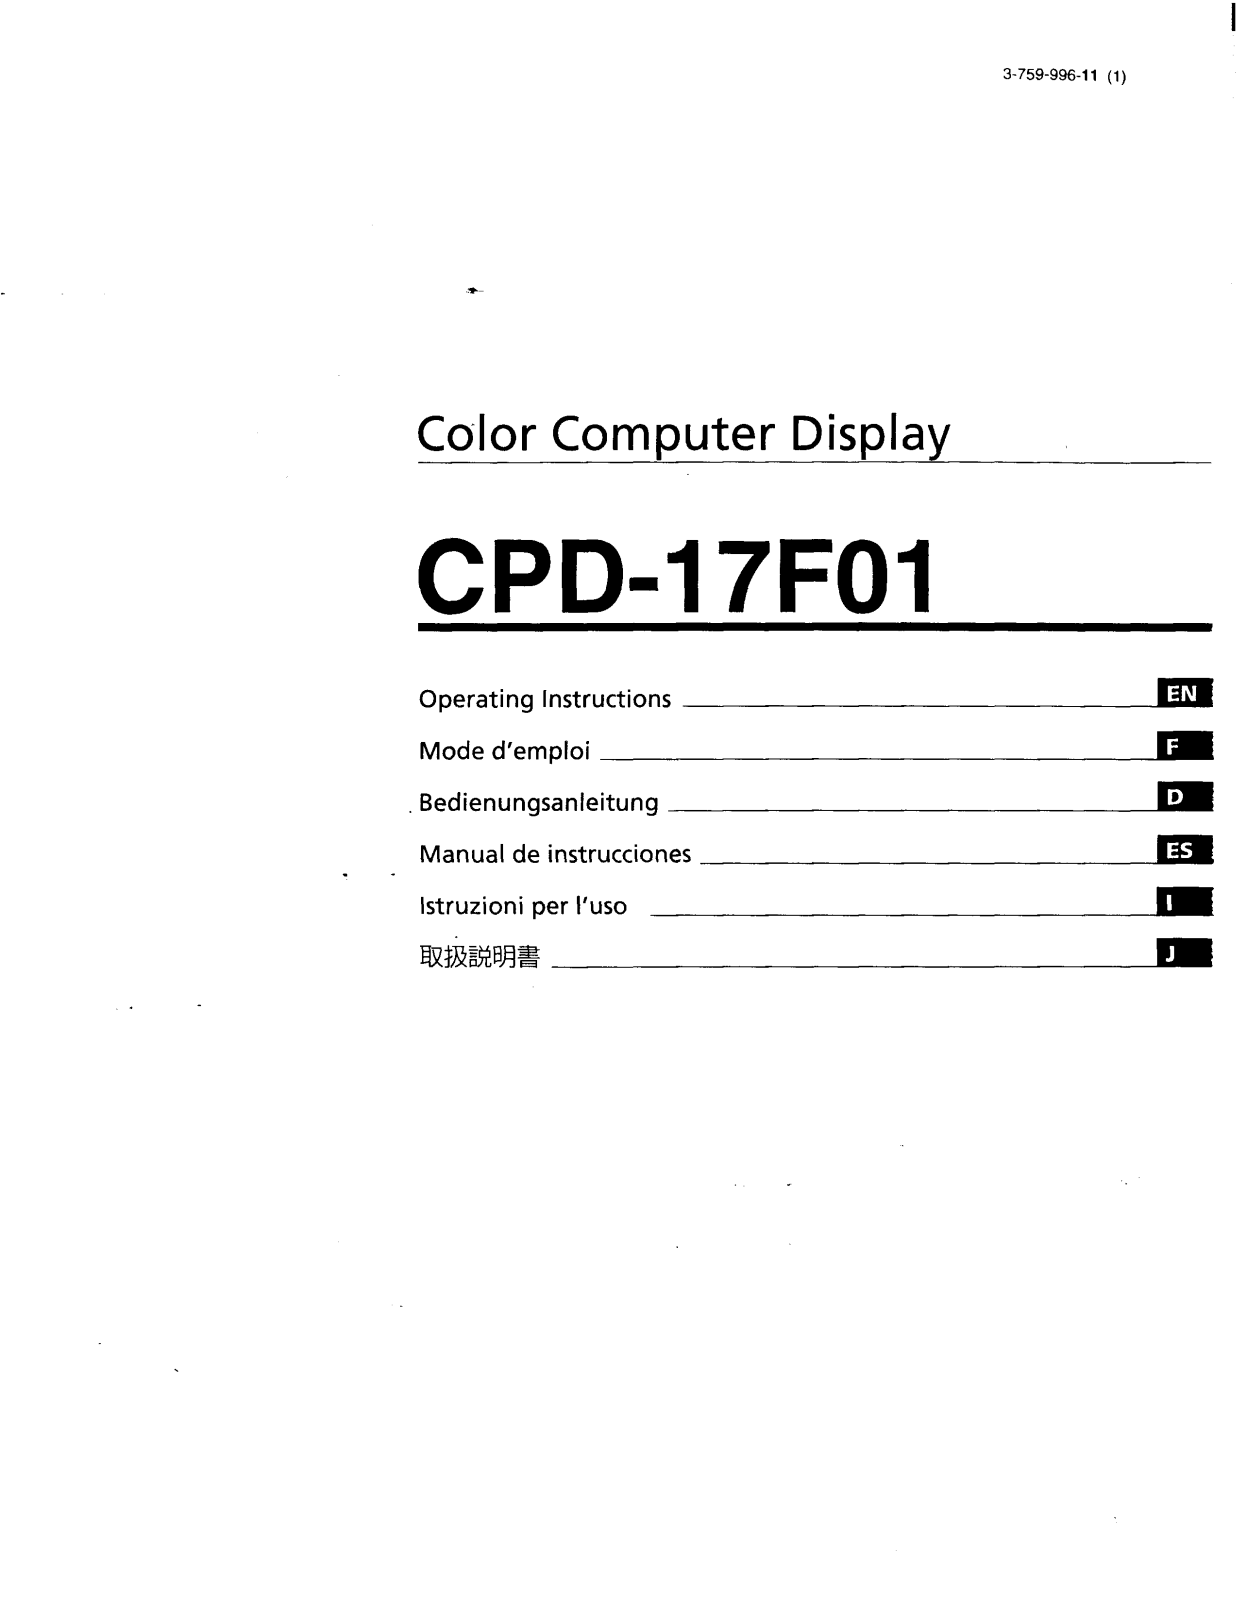 Sony CPD-17F01 Operating Manual